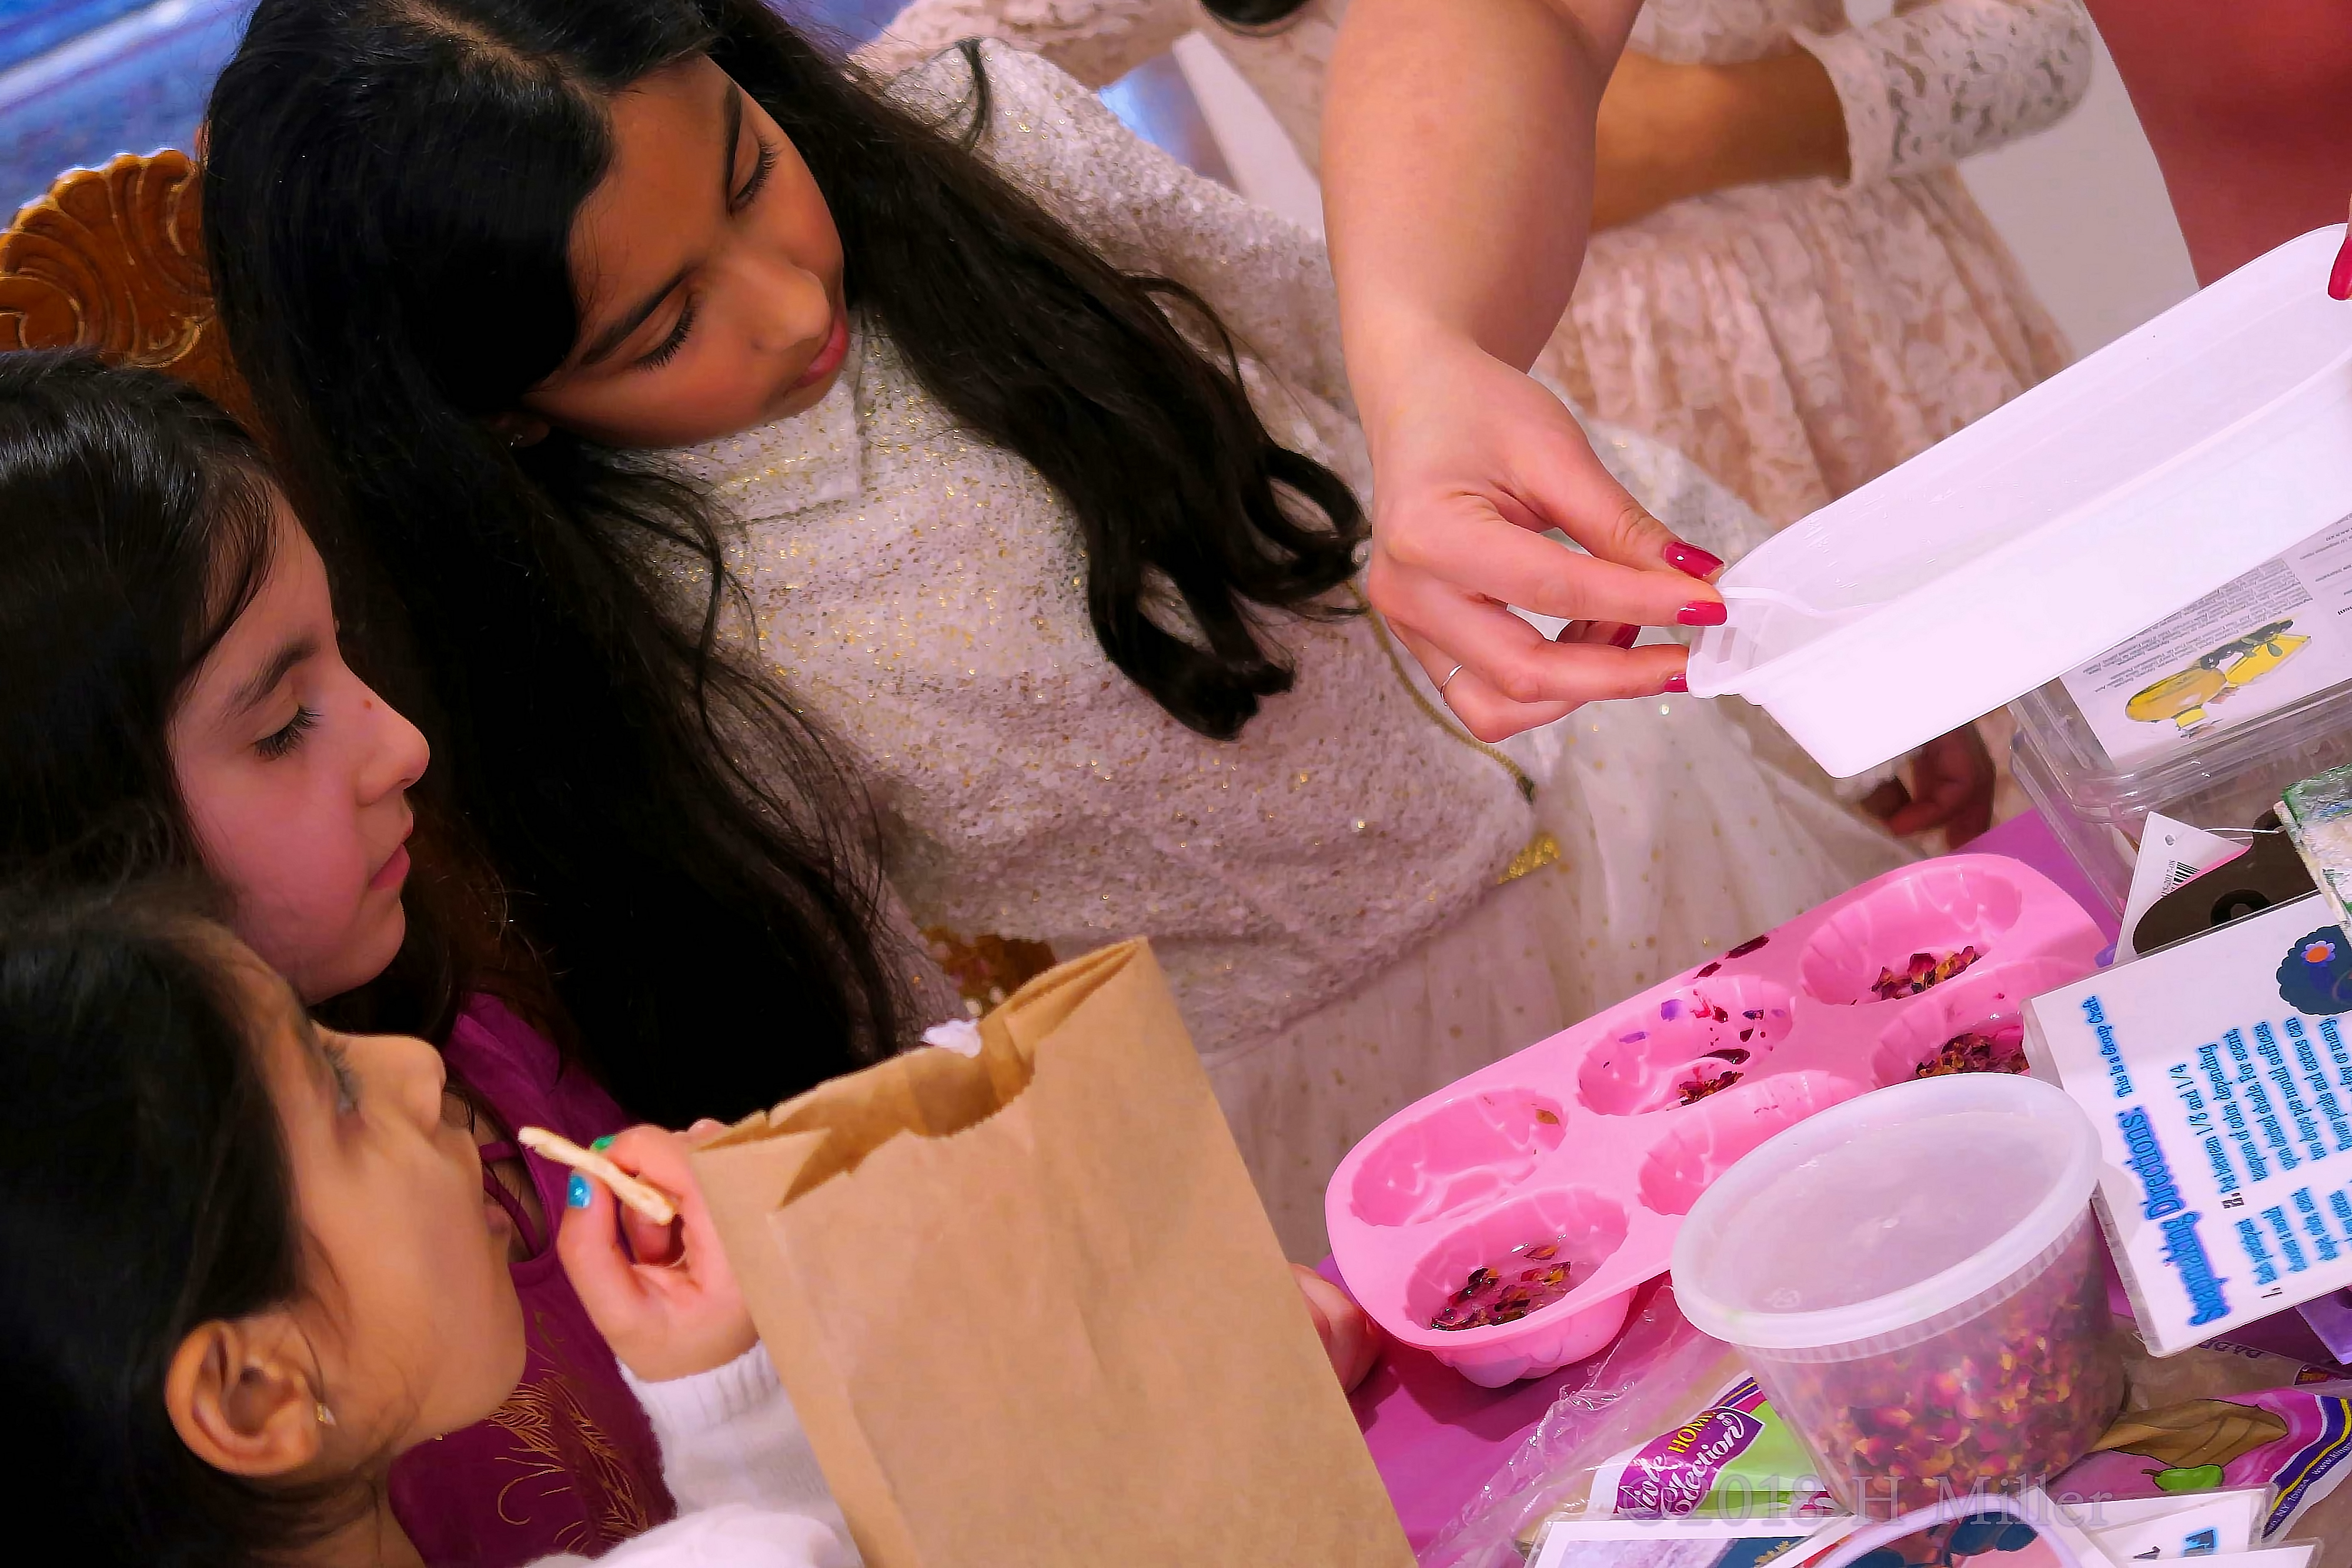 Learning Soap Crafts Is Fun. Homemade Soap Kids Crafts At Fatima's Spa Party